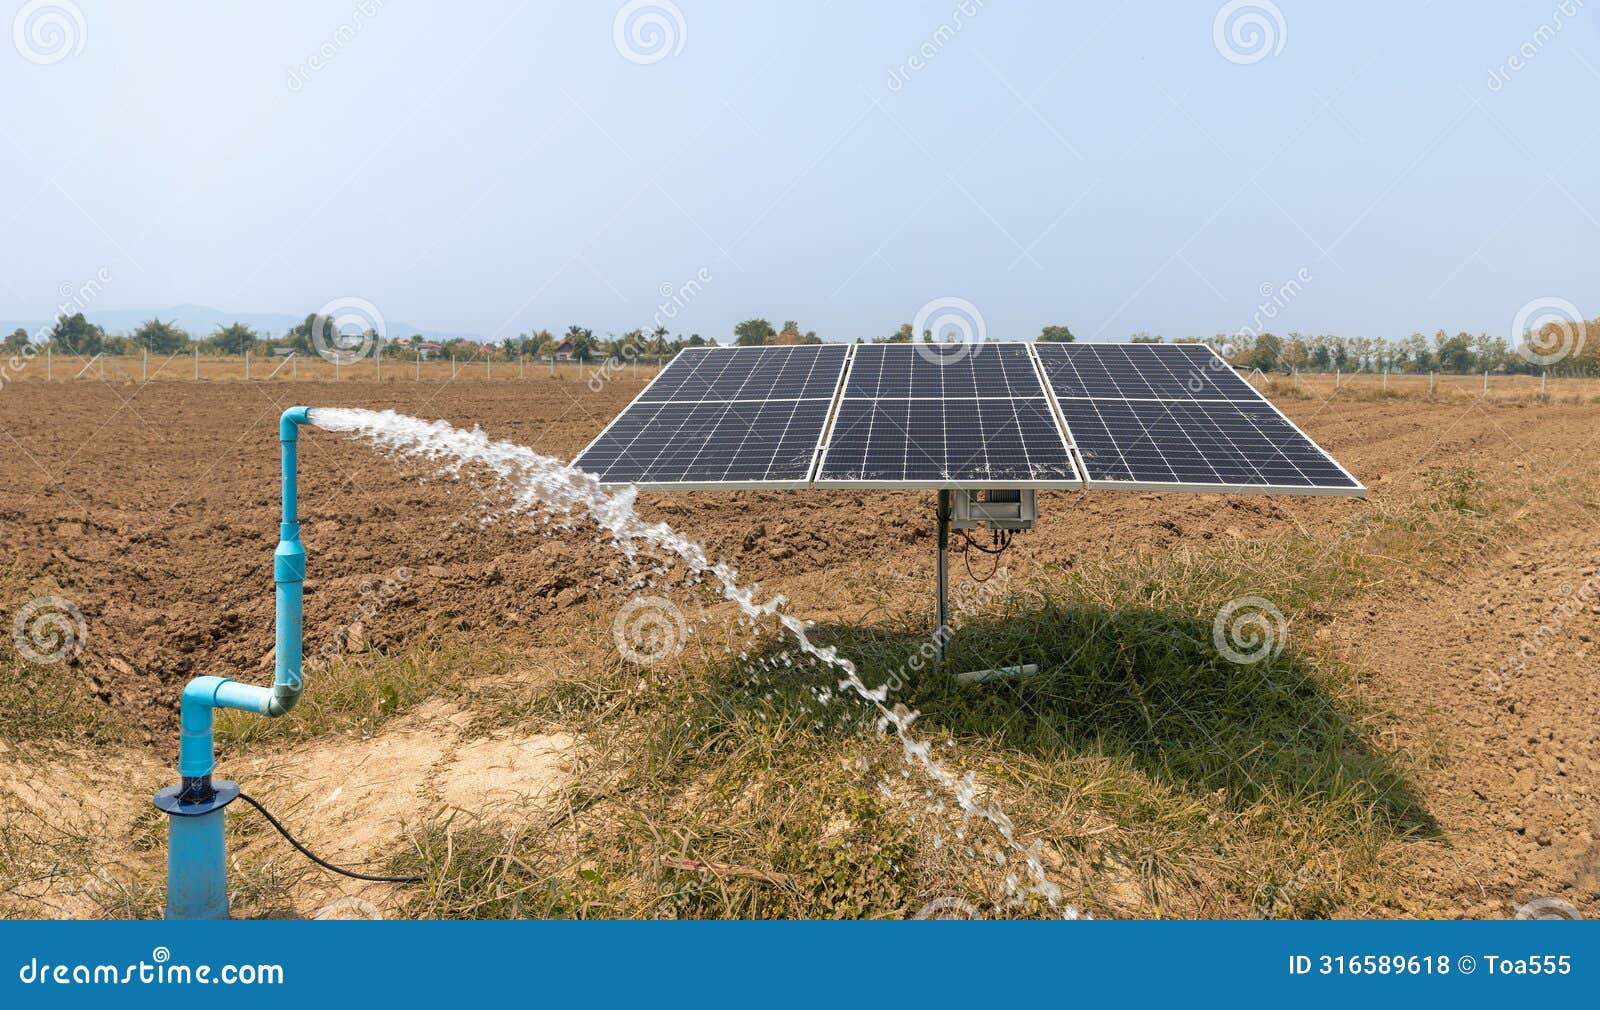 solar panel for groundwater pump in agricultural field during drought by el nino phenomenon